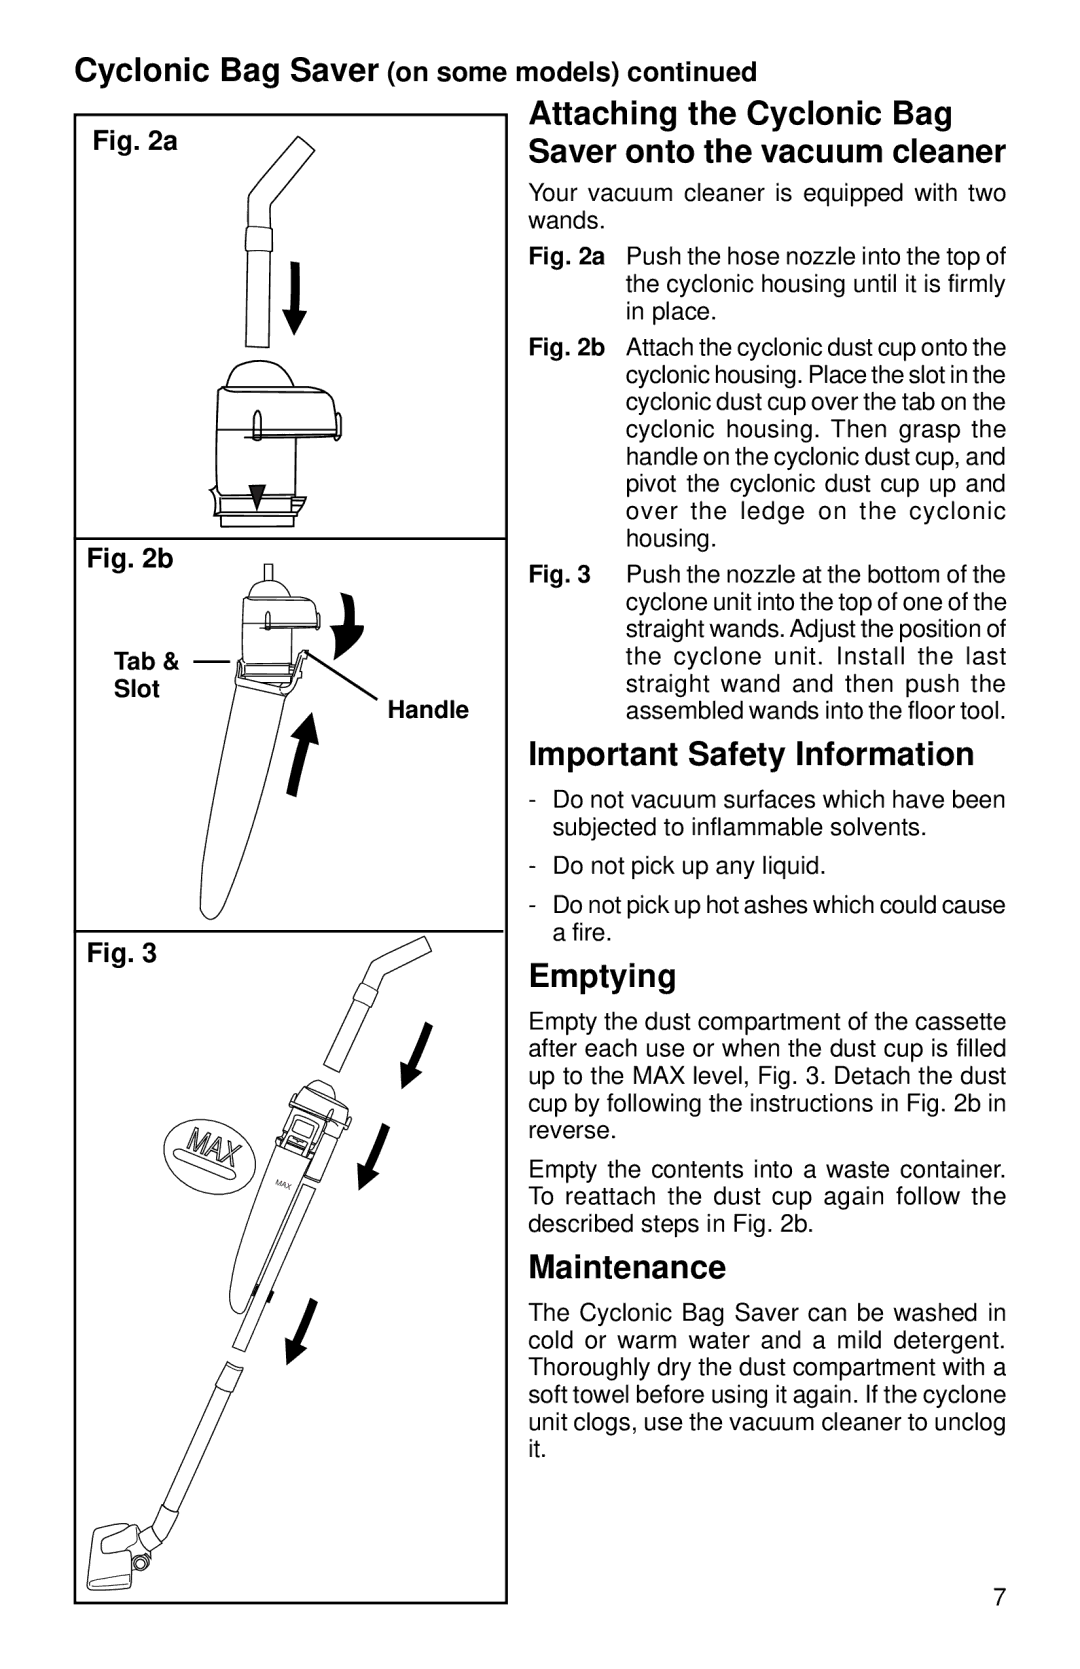 Eureka 3670-3695 warranty Attaching the Cyclonic Bag Saver onto the vacuum cleaner, Important Safety Information, Emptying 